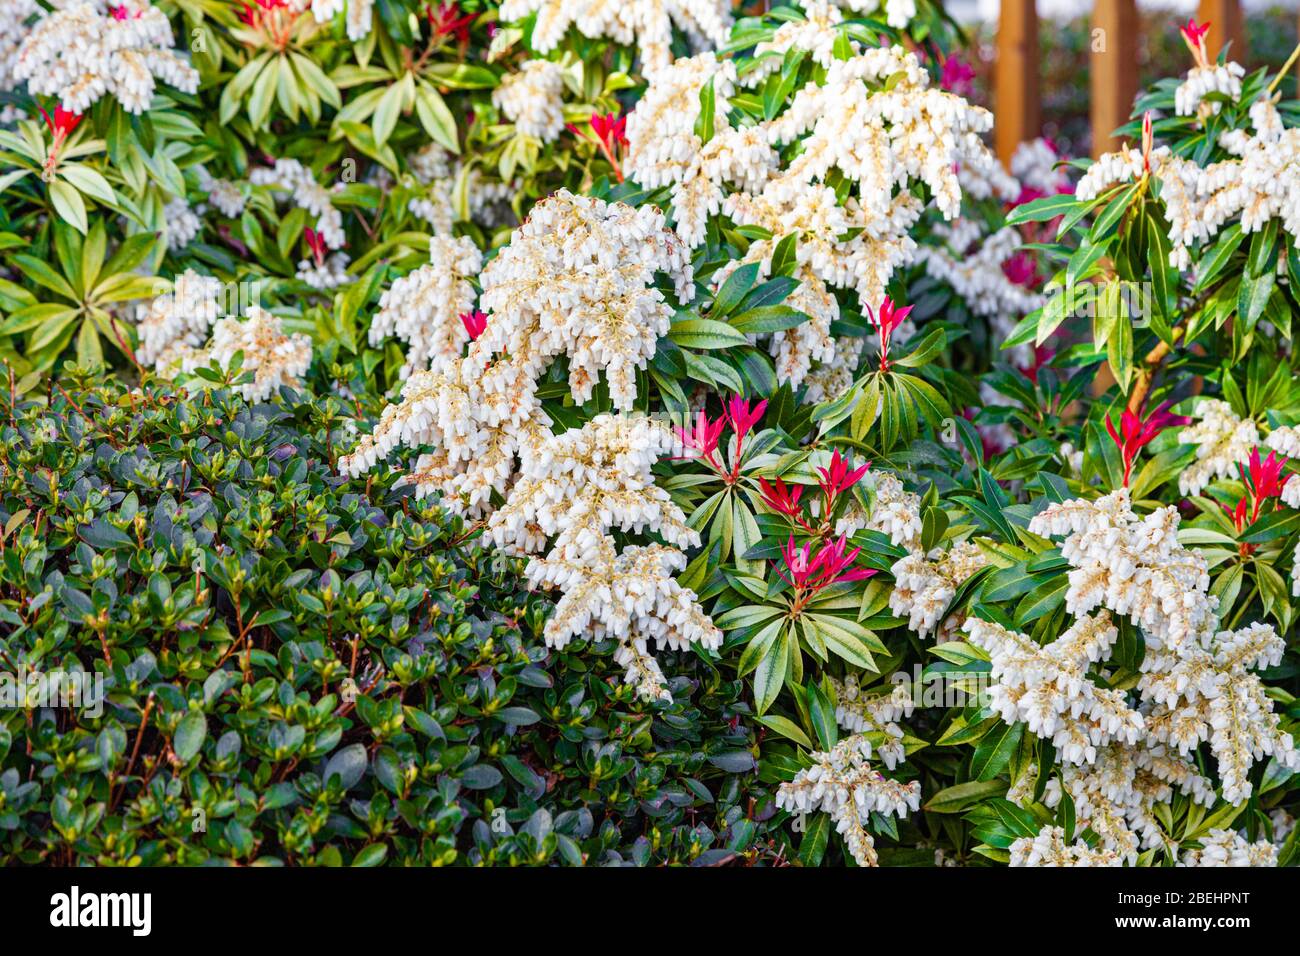 Abstract view of a Pieris shrub among other bushes in a landscaped garden Stock Photo